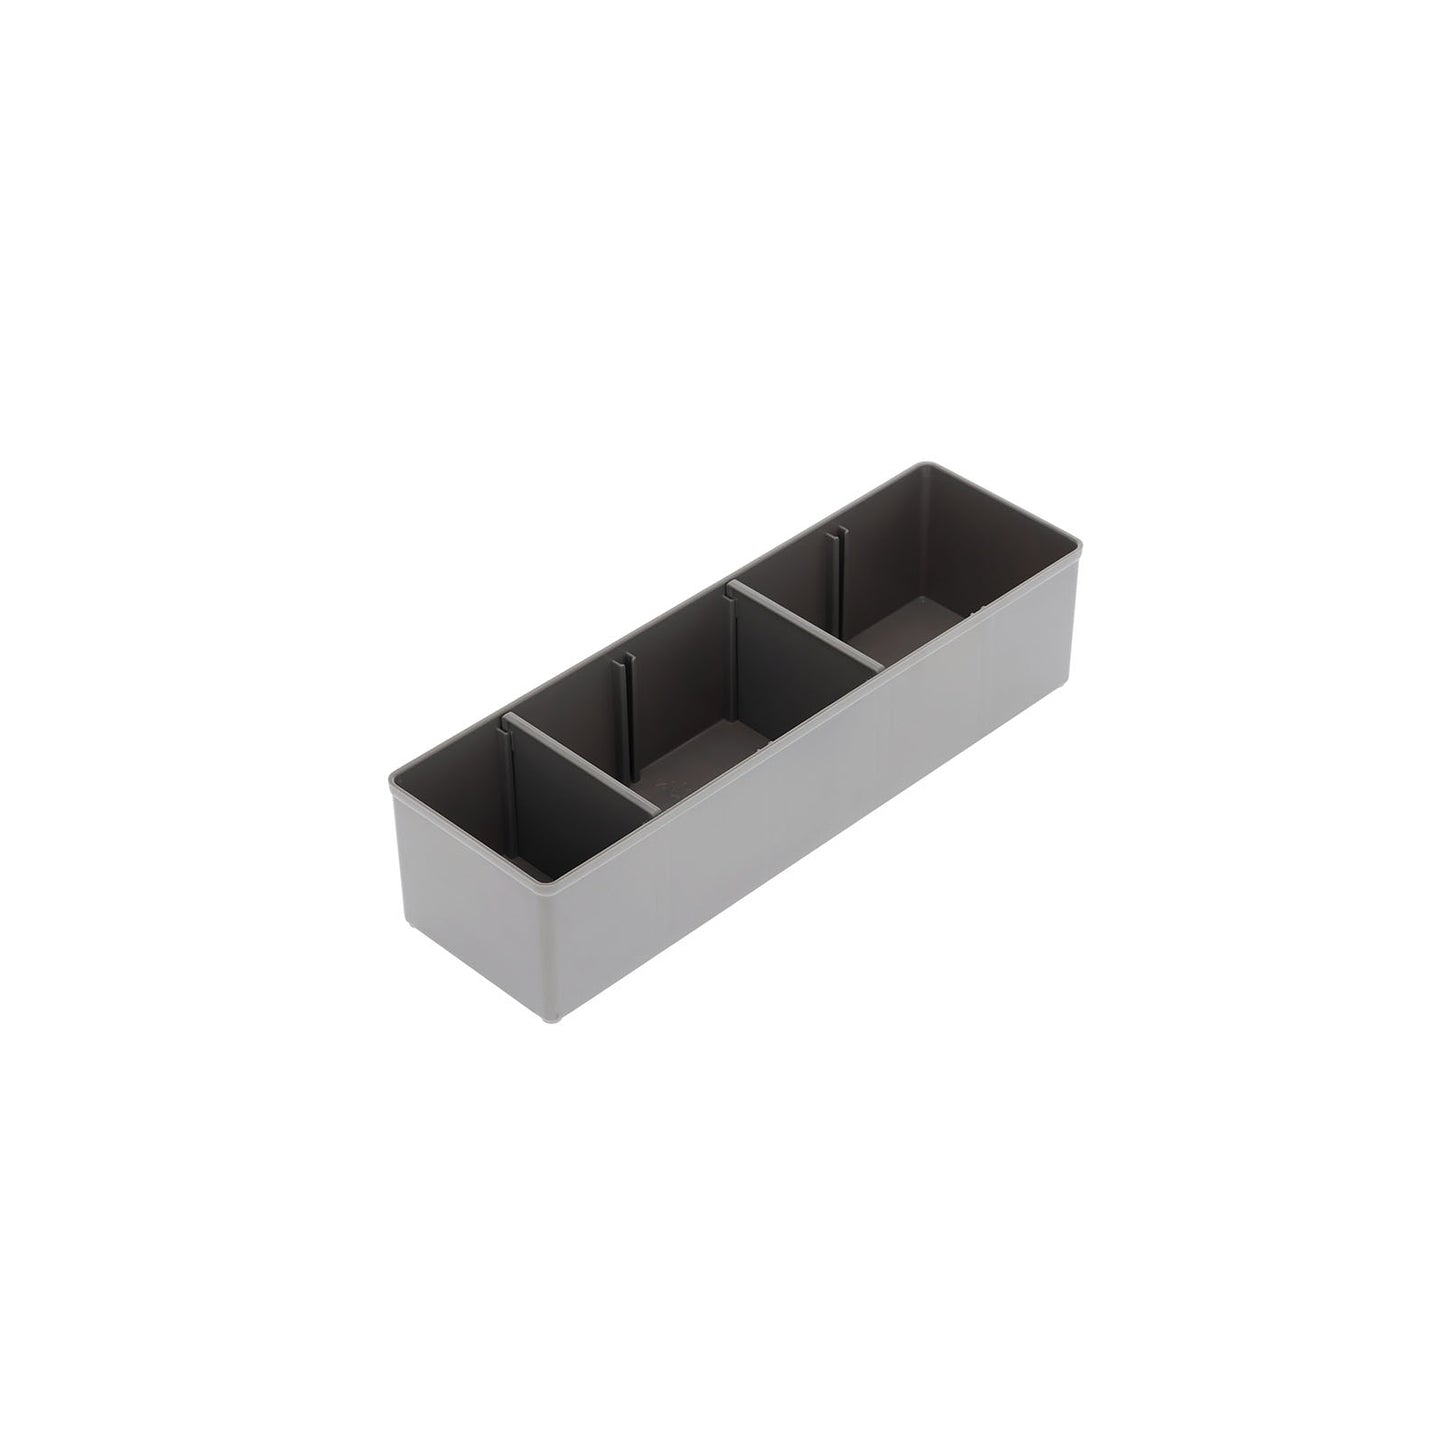 GEDORE E-1101 BT - Insertable compartment I3 (2840006)